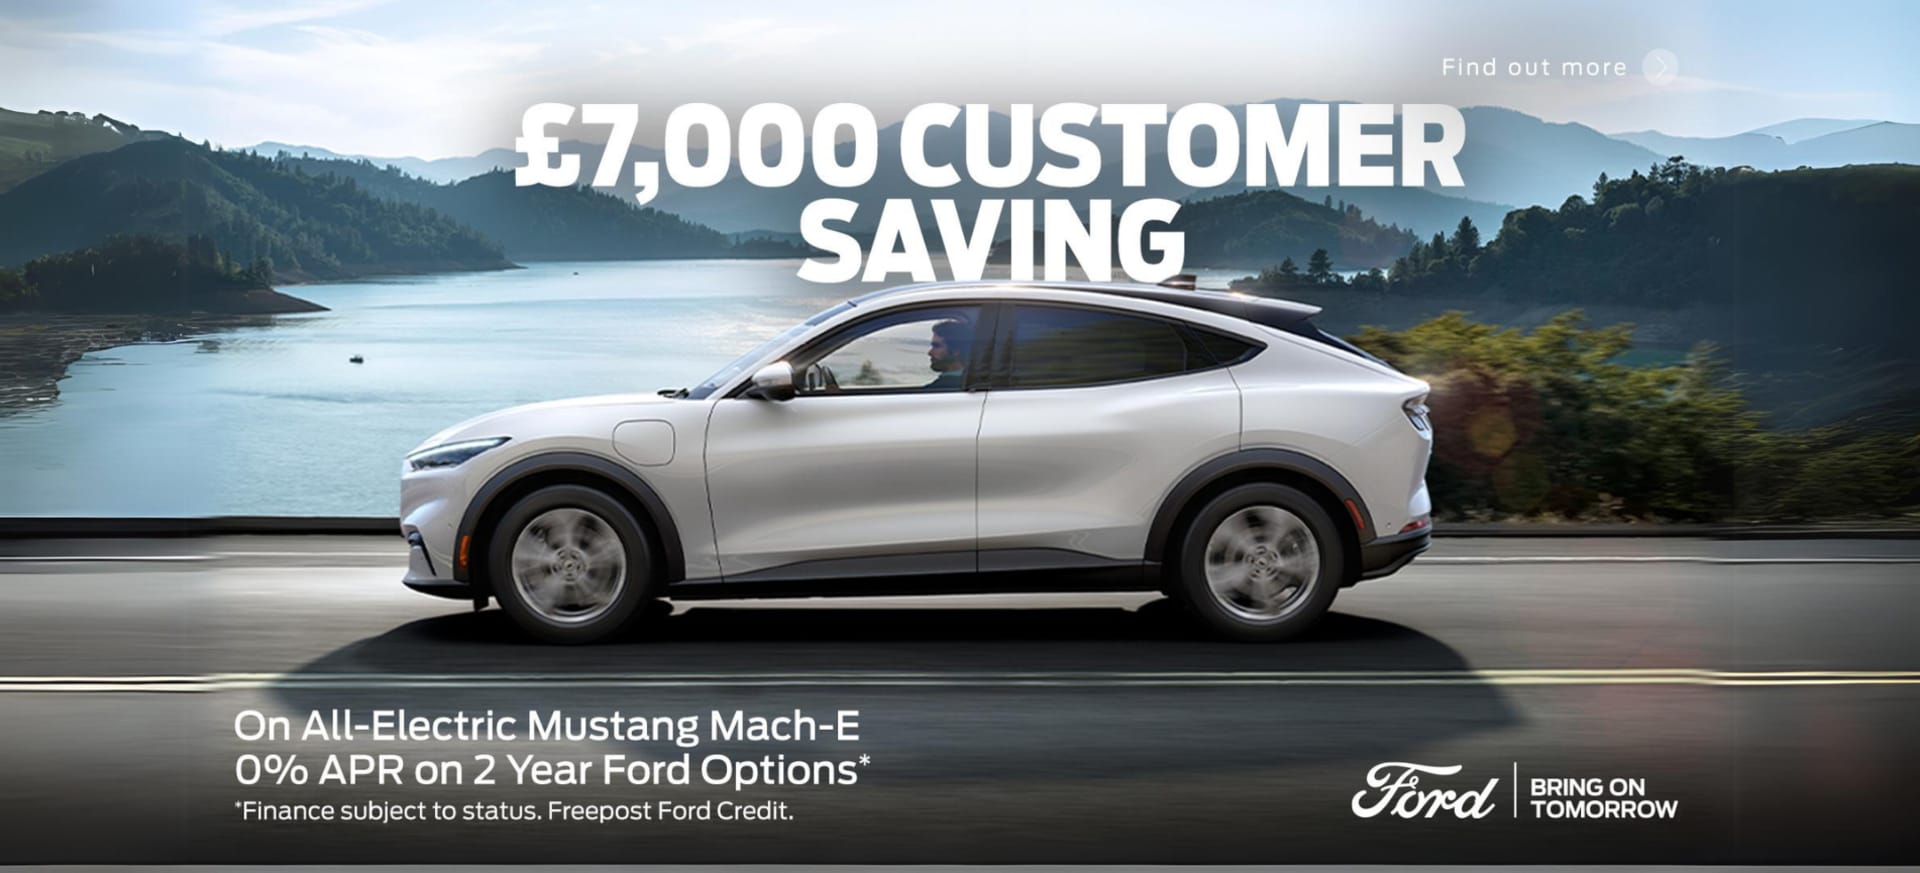 All-Electric Mustang Mach E - 0% APR on 2 Yr Options